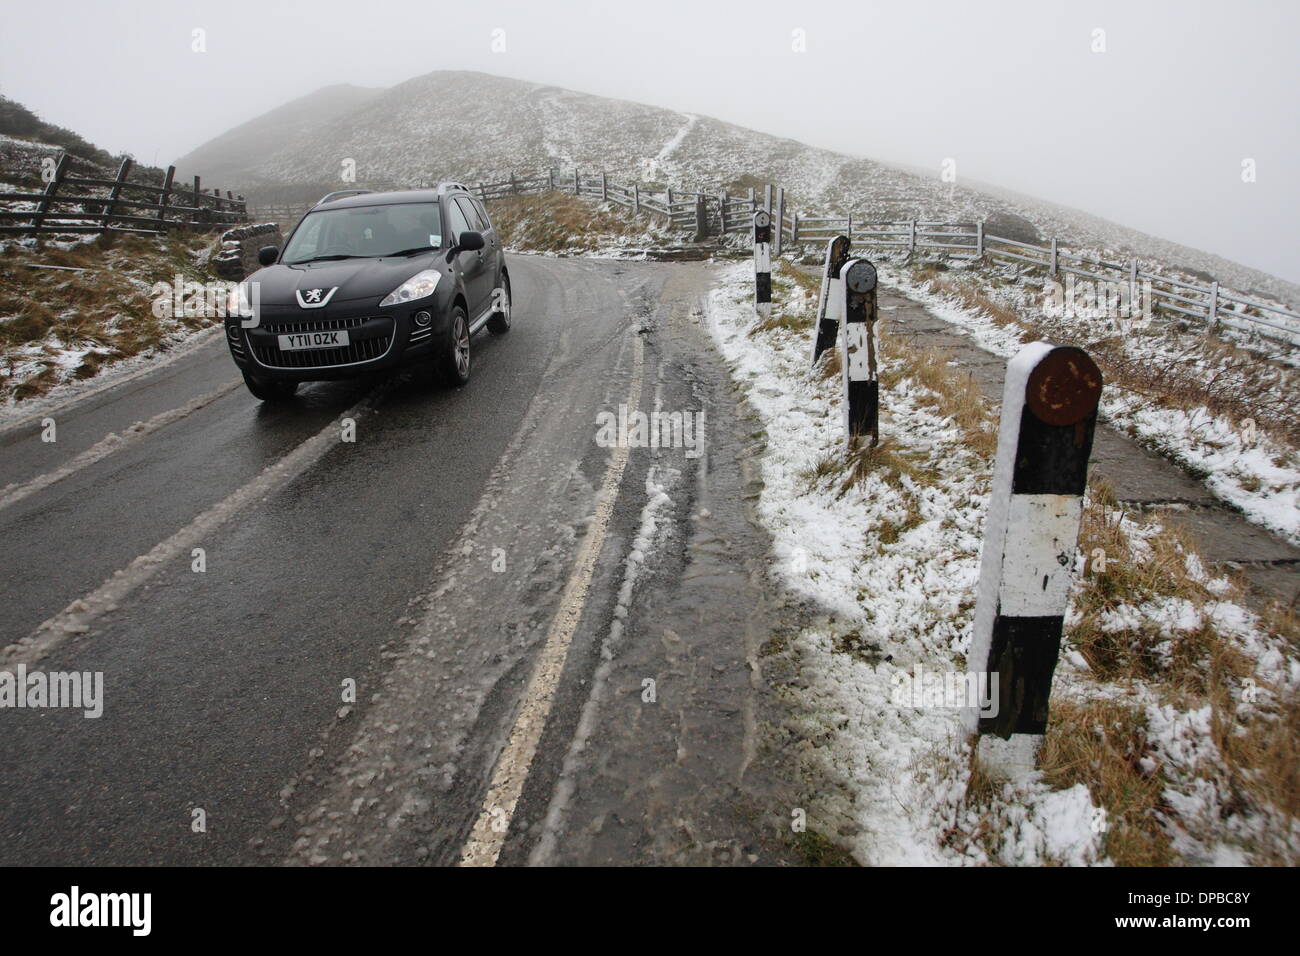 Peak District, Derbyshire, UK. 11th January 2014. 11 Jan 2014. Wintry conditions  near Castleton made for extra tricky driving conditions after overnight snowfall hit stretches of high ground iin Derbyshire's Peak District. Credit:  Matthew Taylor/Alamy Live News Stock Photo